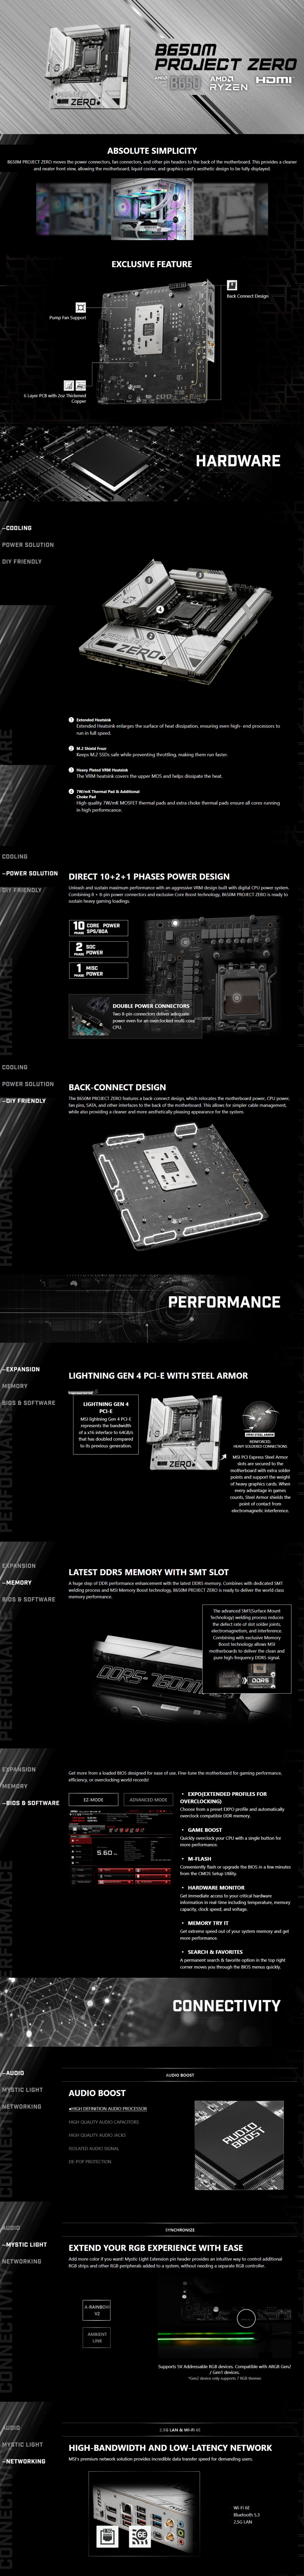 A large marketing image providing additional information about the product MSI B650M Project Zero AM5 mATX Desktop Motherboard - Additional alt info not provided